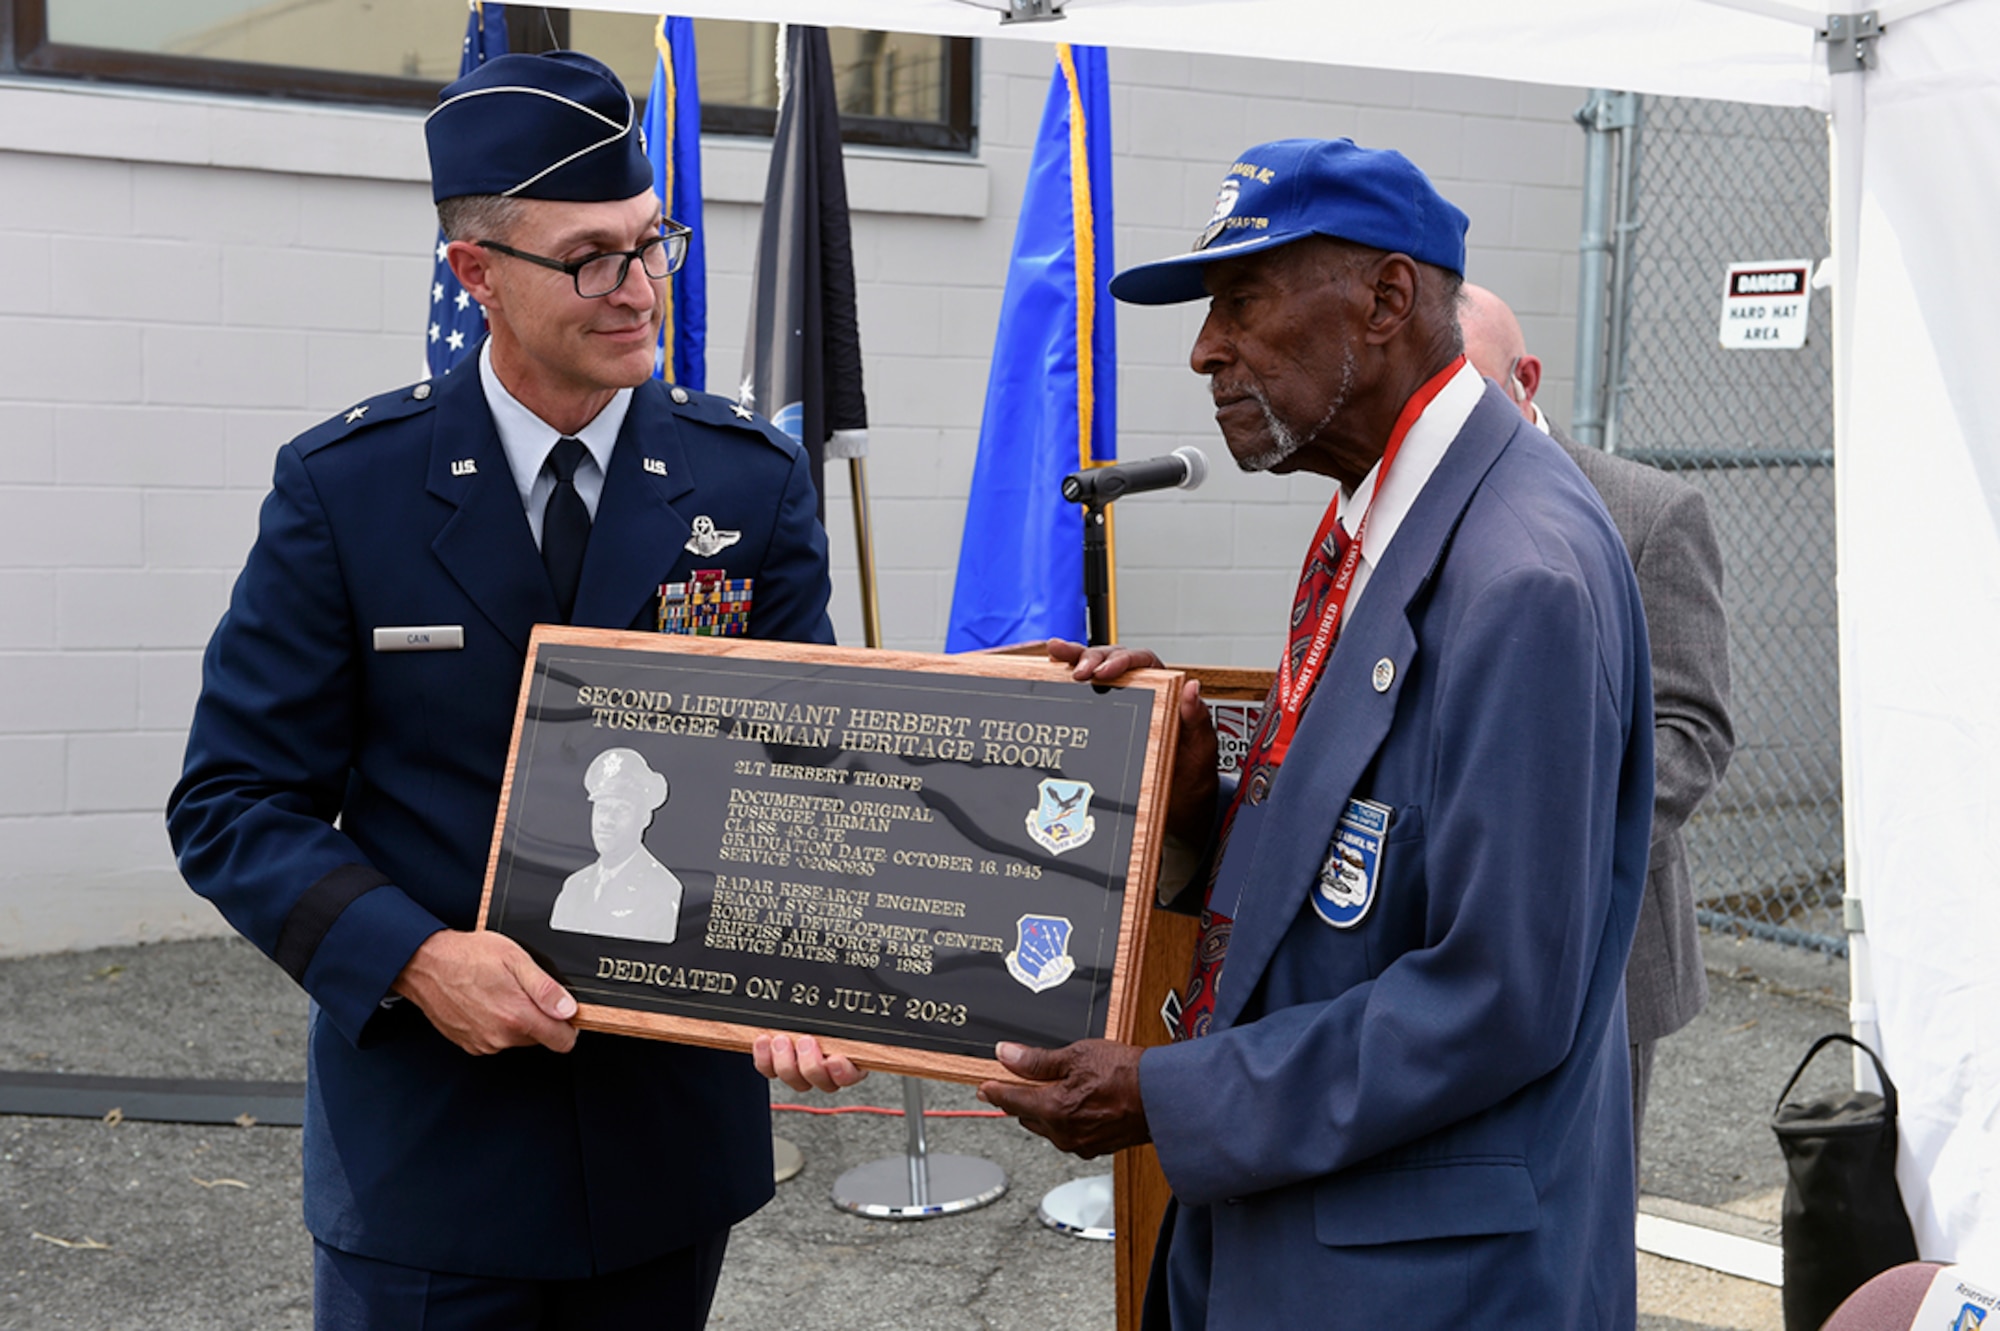 Brig. Gen. Scott Cain presents a dedication plaque, to 2nd Lt. Herbert Thorpe, a Tuskegee Airman and former electrical engineer July 27, 2023. A room at the AFRL Information Directorate in Rome, New York was dedicated in Thorpe’s honor for his service to the nation and to the Air Force Research Laboratory. (U.S. Air Force photo/Albert Santacroce)